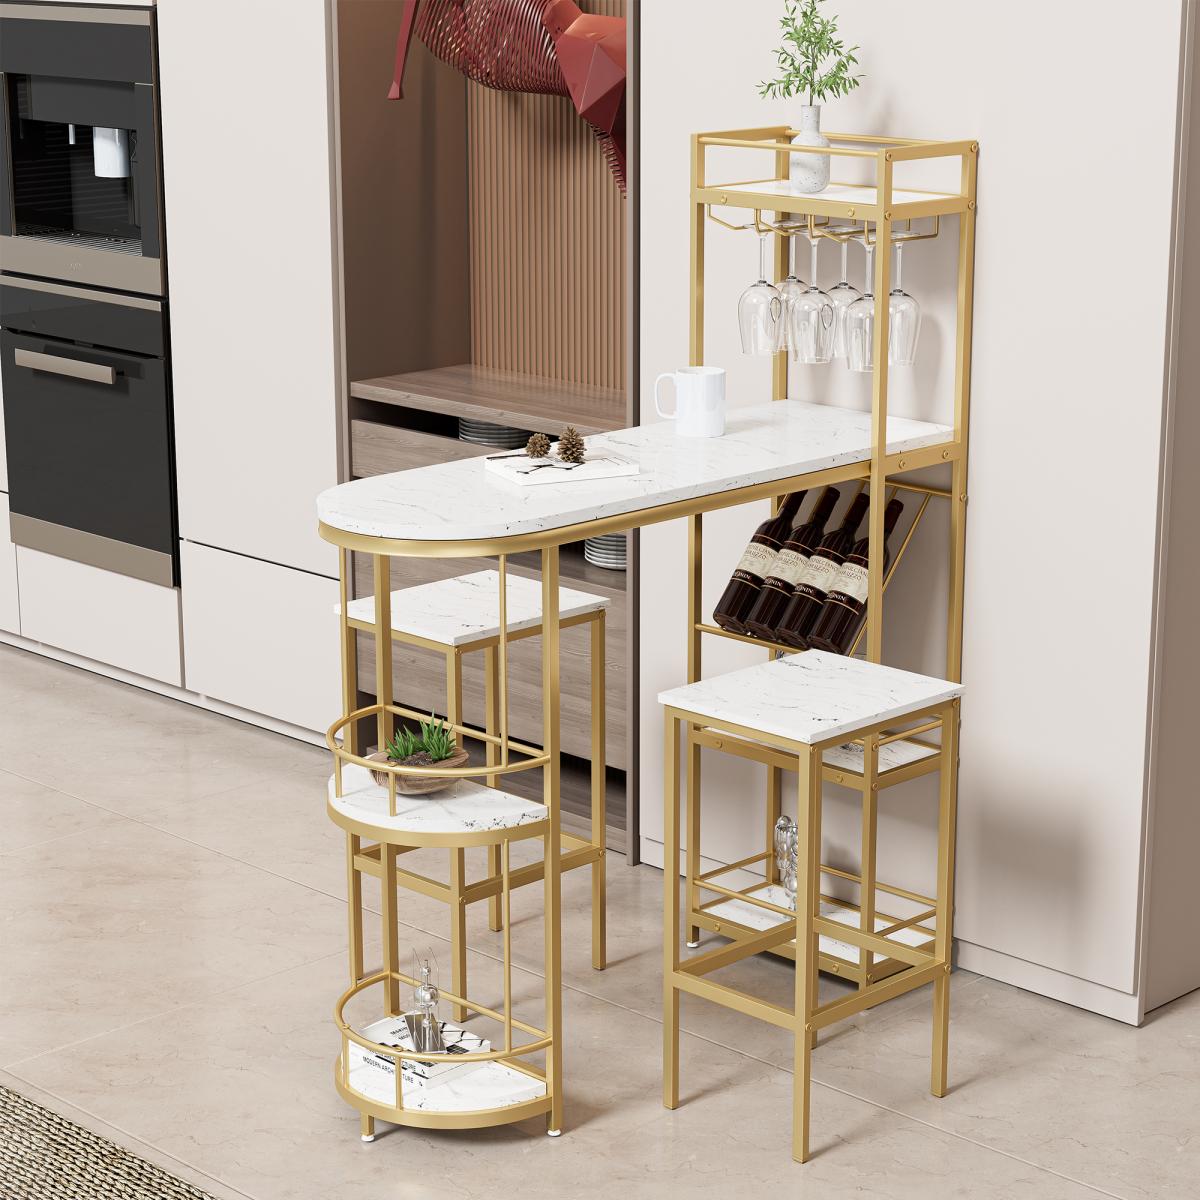 3 Pcs Bar Table and Chairs Set, Modern White Kitchen Bar Height Dining Table Wood Breakfast Pub Table with Gold Base with Shelves, Glass Rack, Wine Bottle Rack ,with 2 Bar Stools